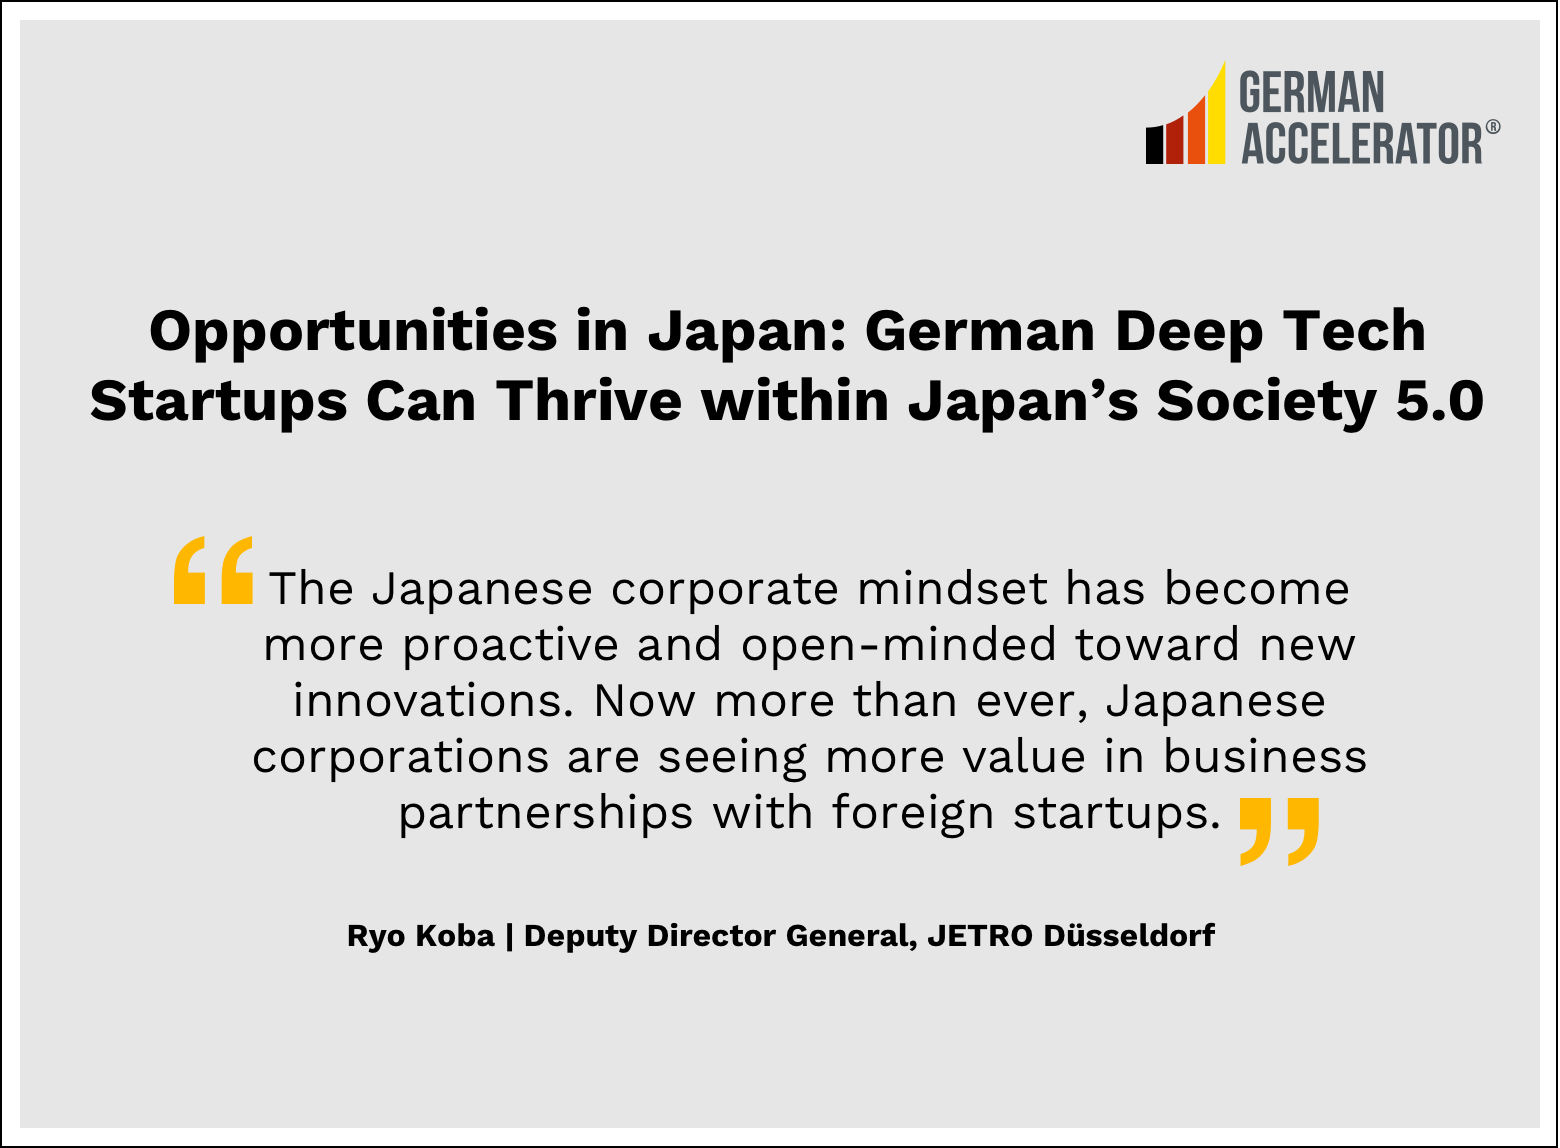 Opportunities in Japan: German Deep Tech Startups Can Thrive within Japan’s Society 5.0